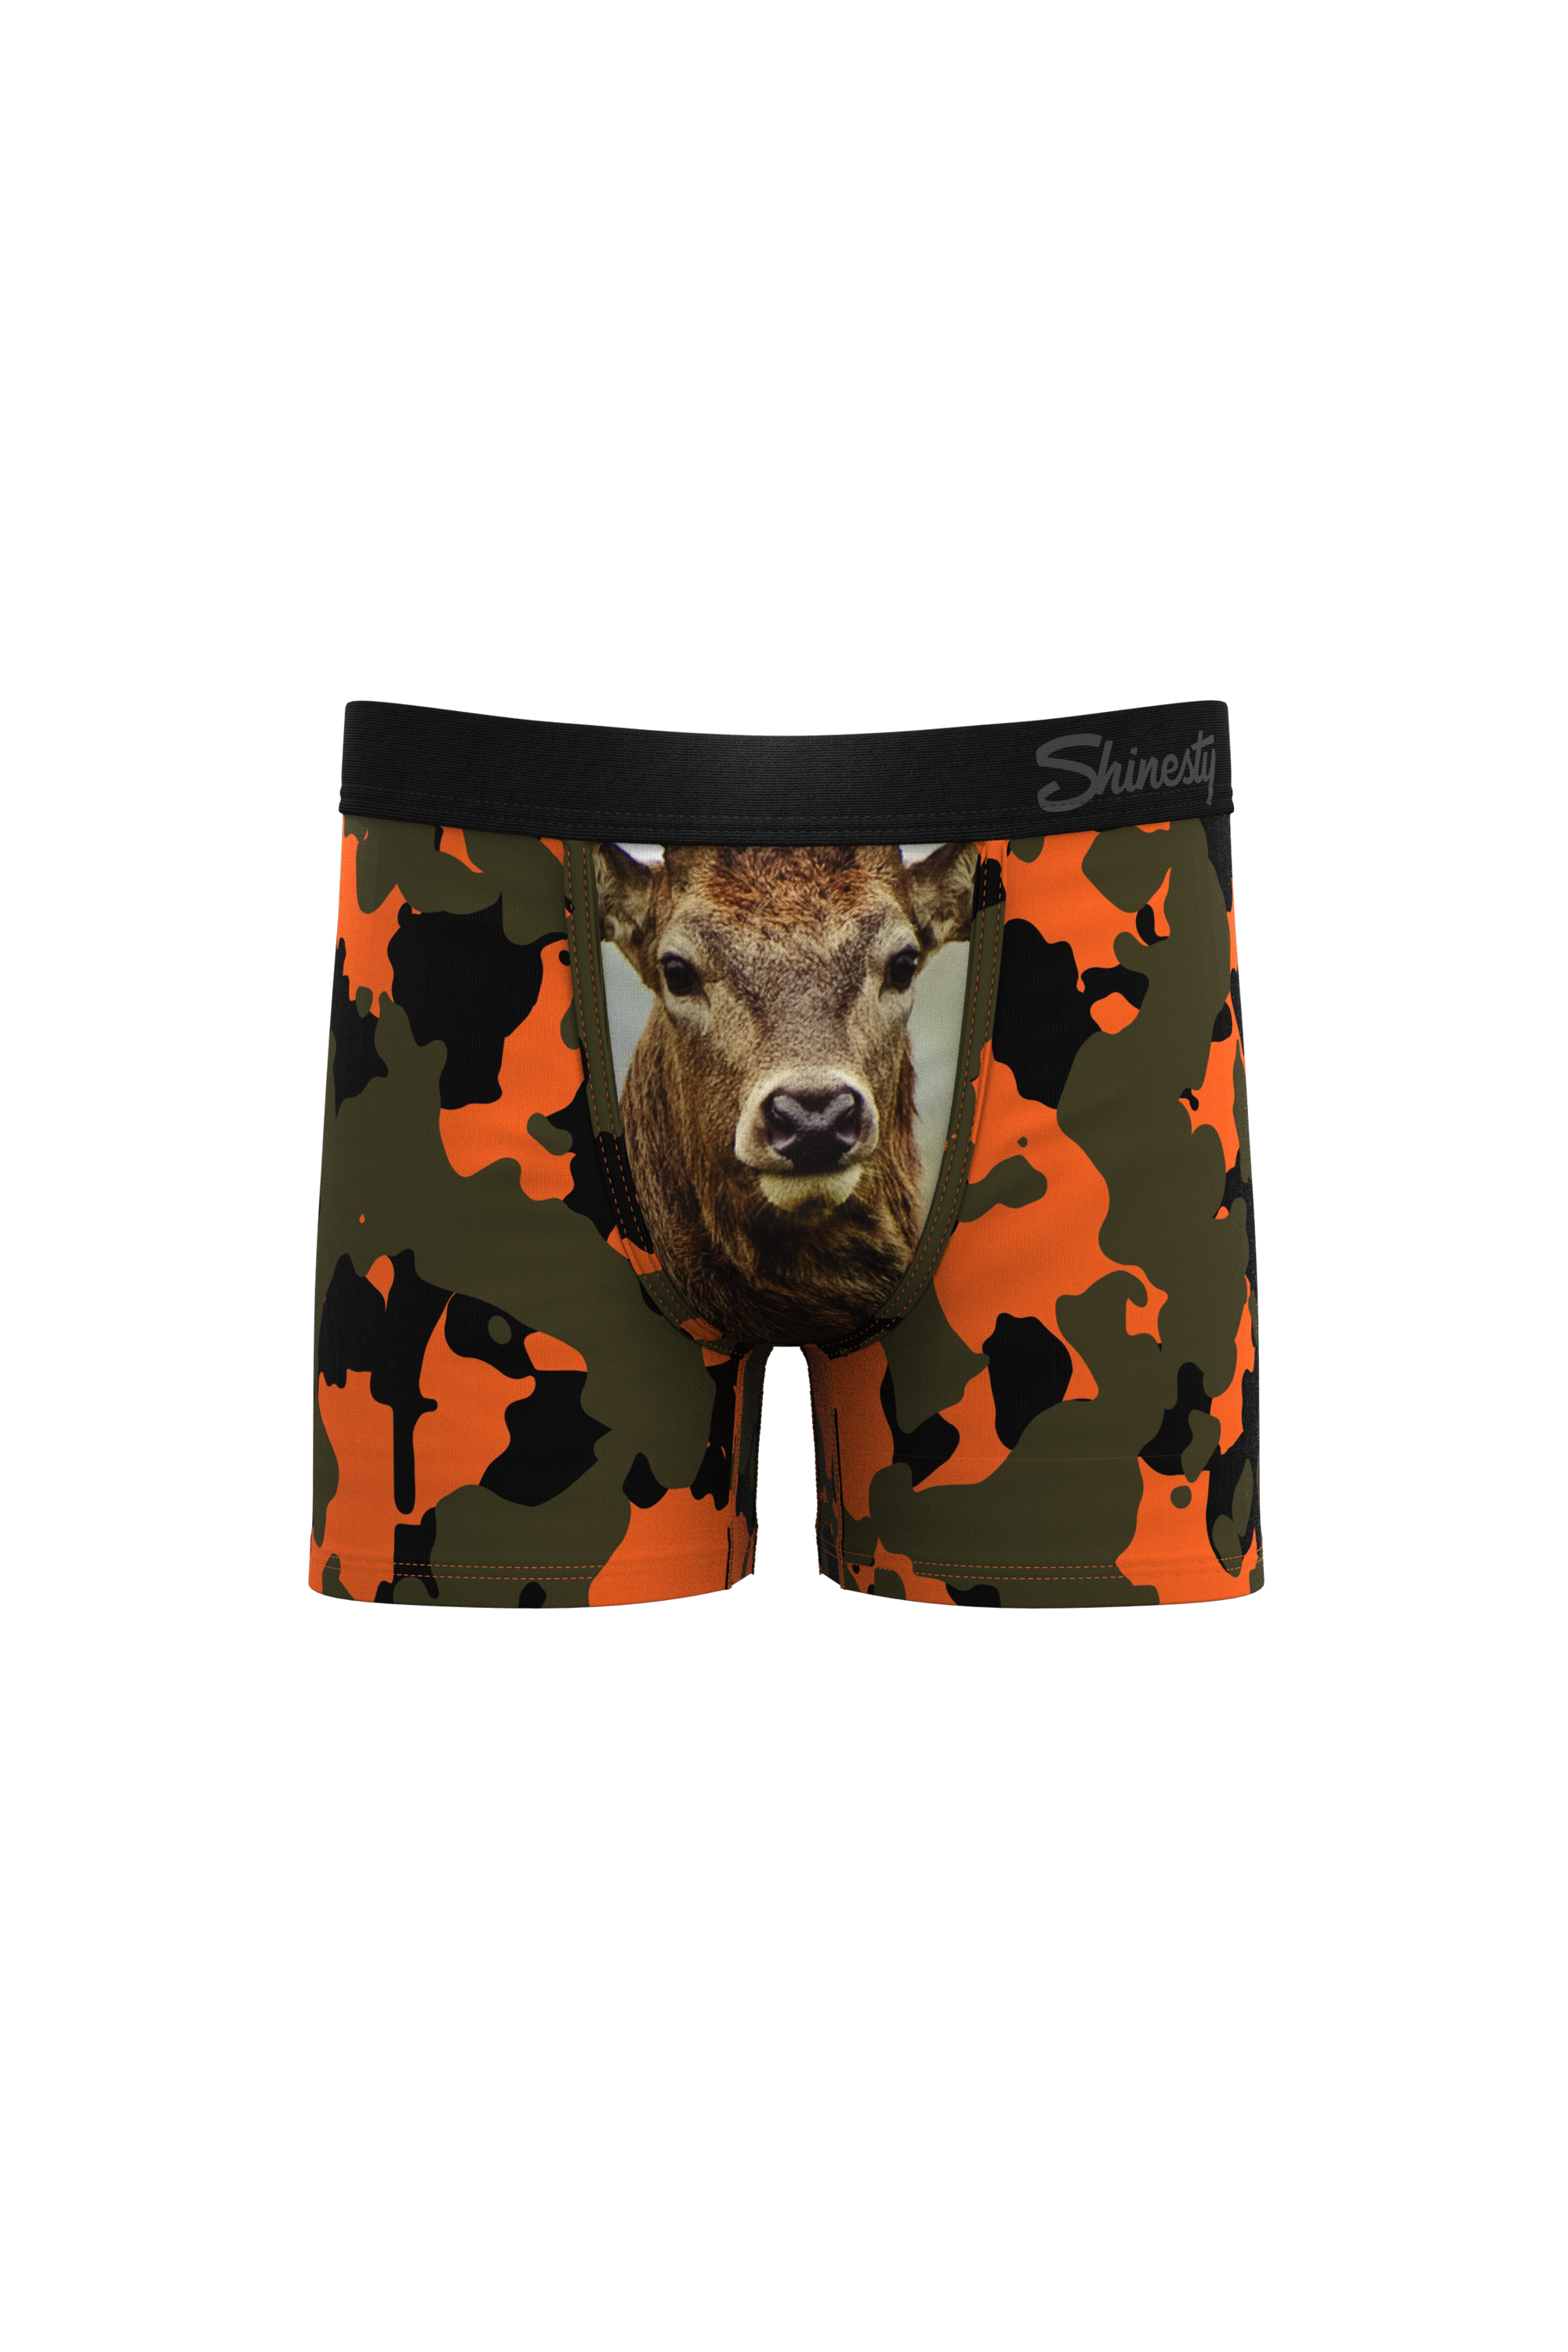 Mens Dill Doe Boxer Briefs Funny Offensive Pickle Deer Graphic Novelty  Underwear